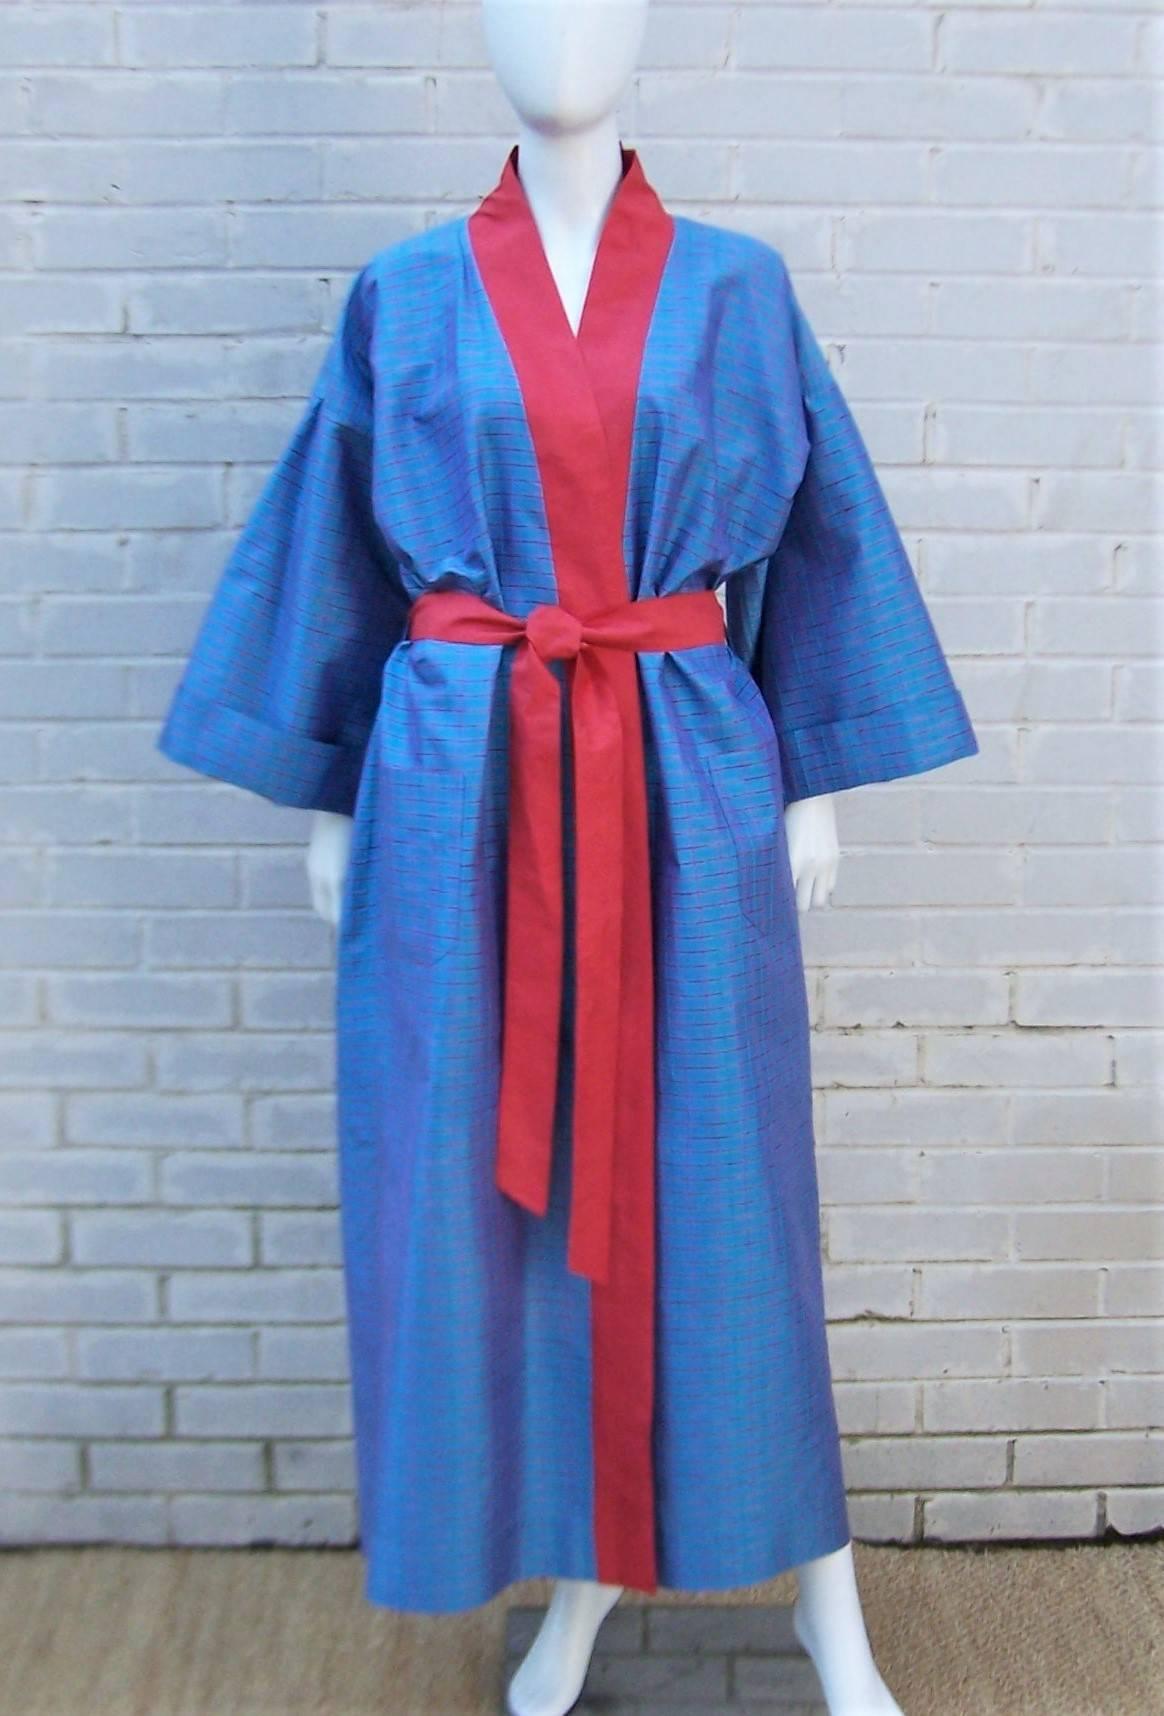 Take lounging to a whole new level with this Jim Thompson robe made from hand woven Thai silk in a brilliant blue windowpane design with tomato red accents, collar and sash.  Jim Thompson was an American art collector who dedicated himself to